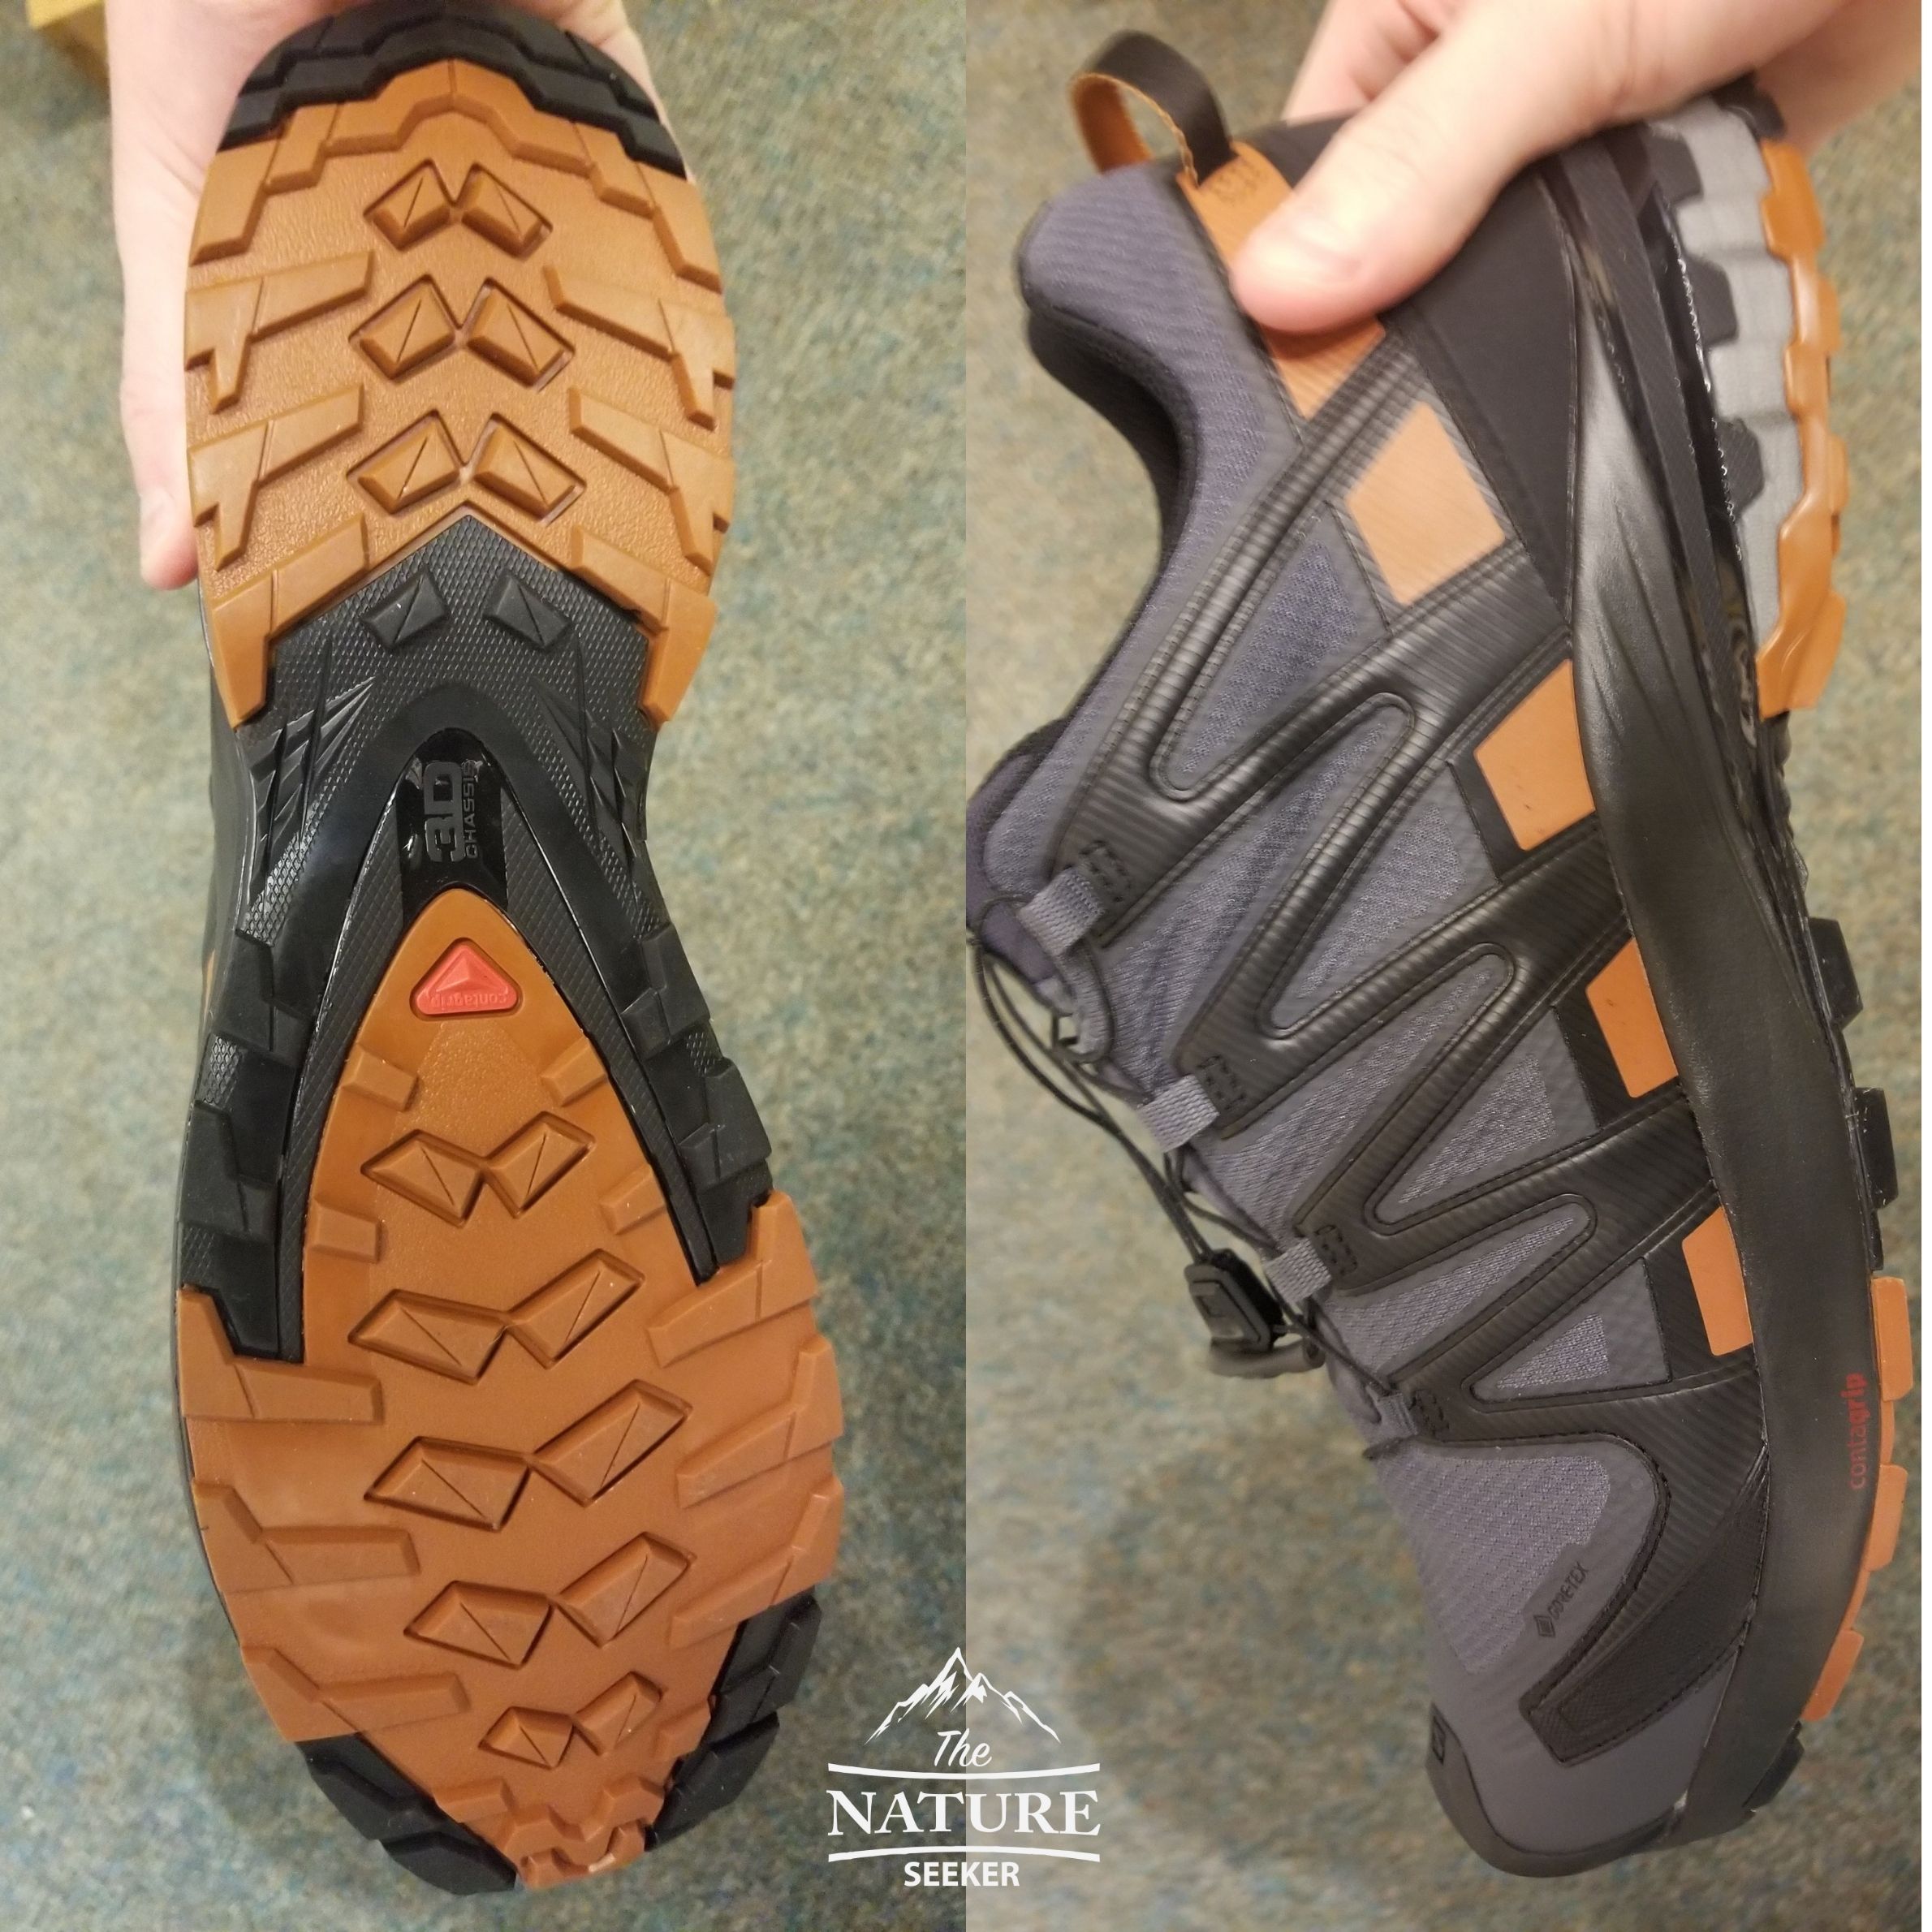 first impressions of the Salomon Men's XA Pro 3D GTX Trail Running shoes